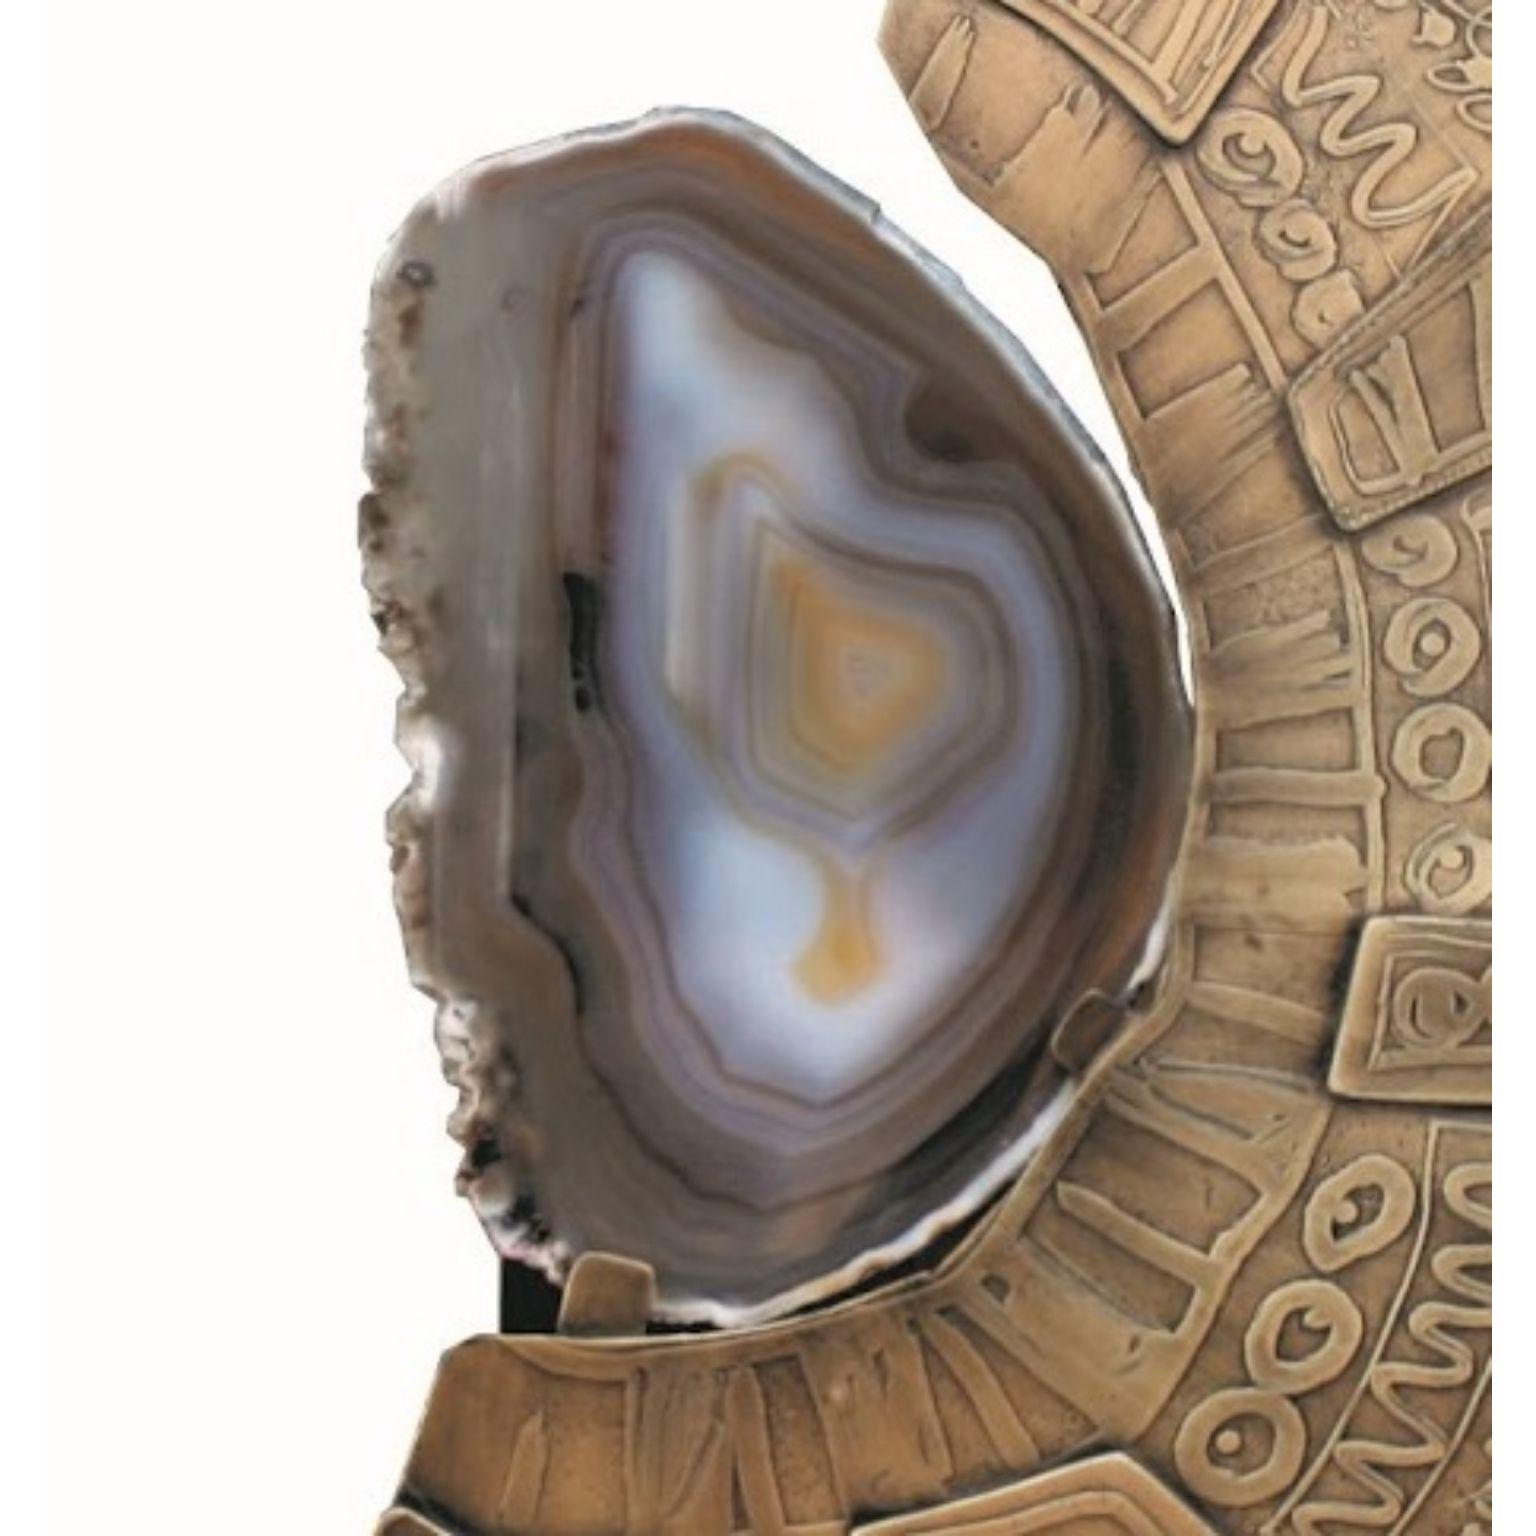 Aztec Agate Stone Stand by Brutalist Be
One Of A Kind
Dimensions: D 22 x W 23 x H 45 cm.
Materials: Brass and agate stone.

Brass acid etched black patinated, hand drawn decorative art on the brass combined with semi precious agate stone slice.

All